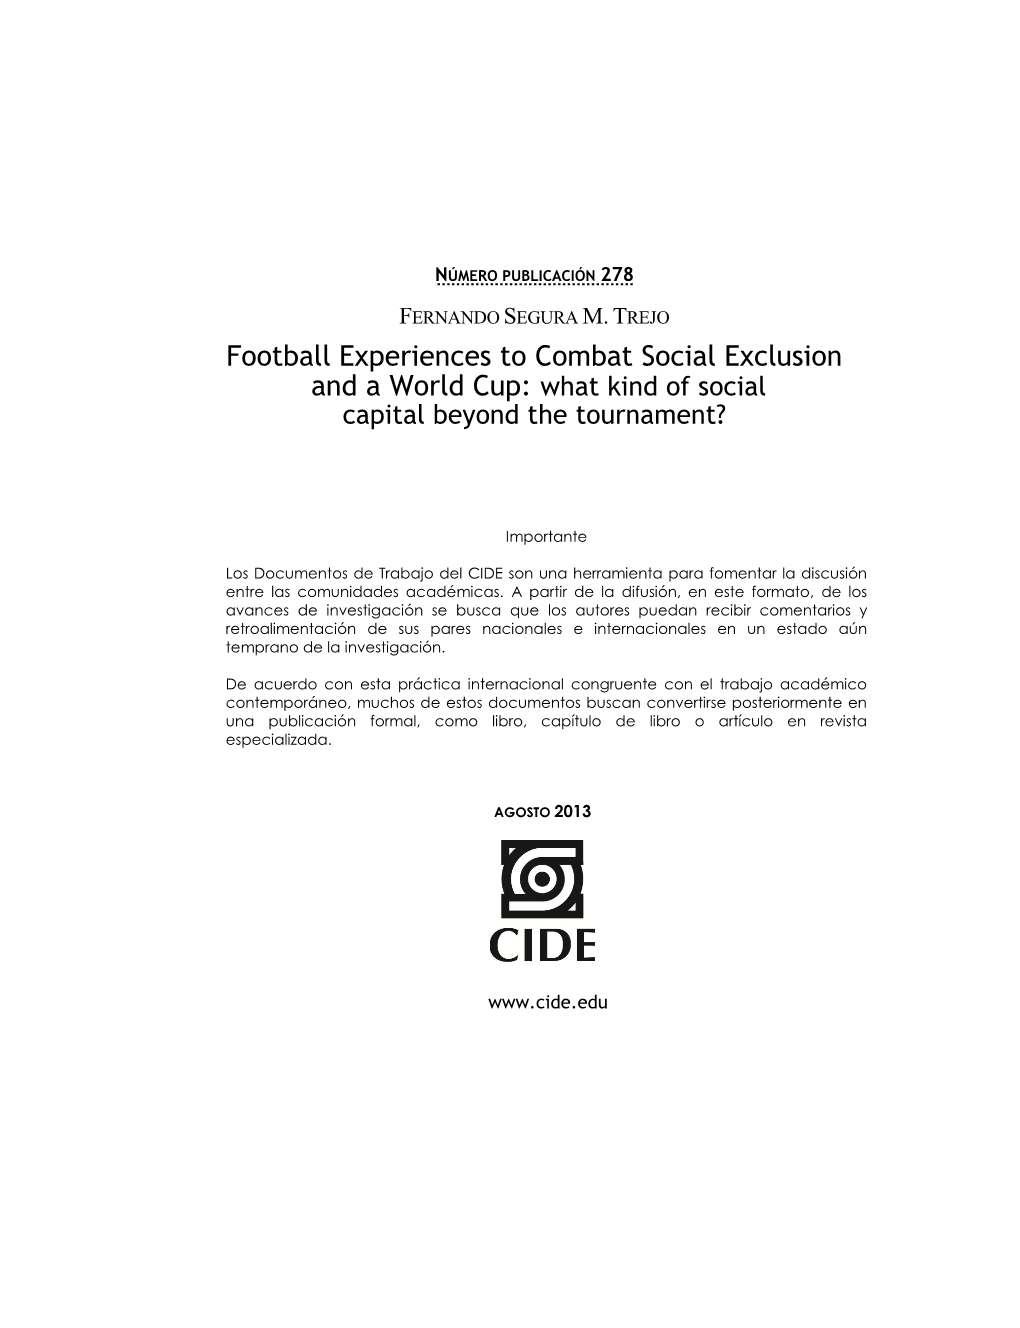 Football Experiences to Combat Social Exclusion and a World Cup: What Kind of Social Capital Beyond the Tournament?